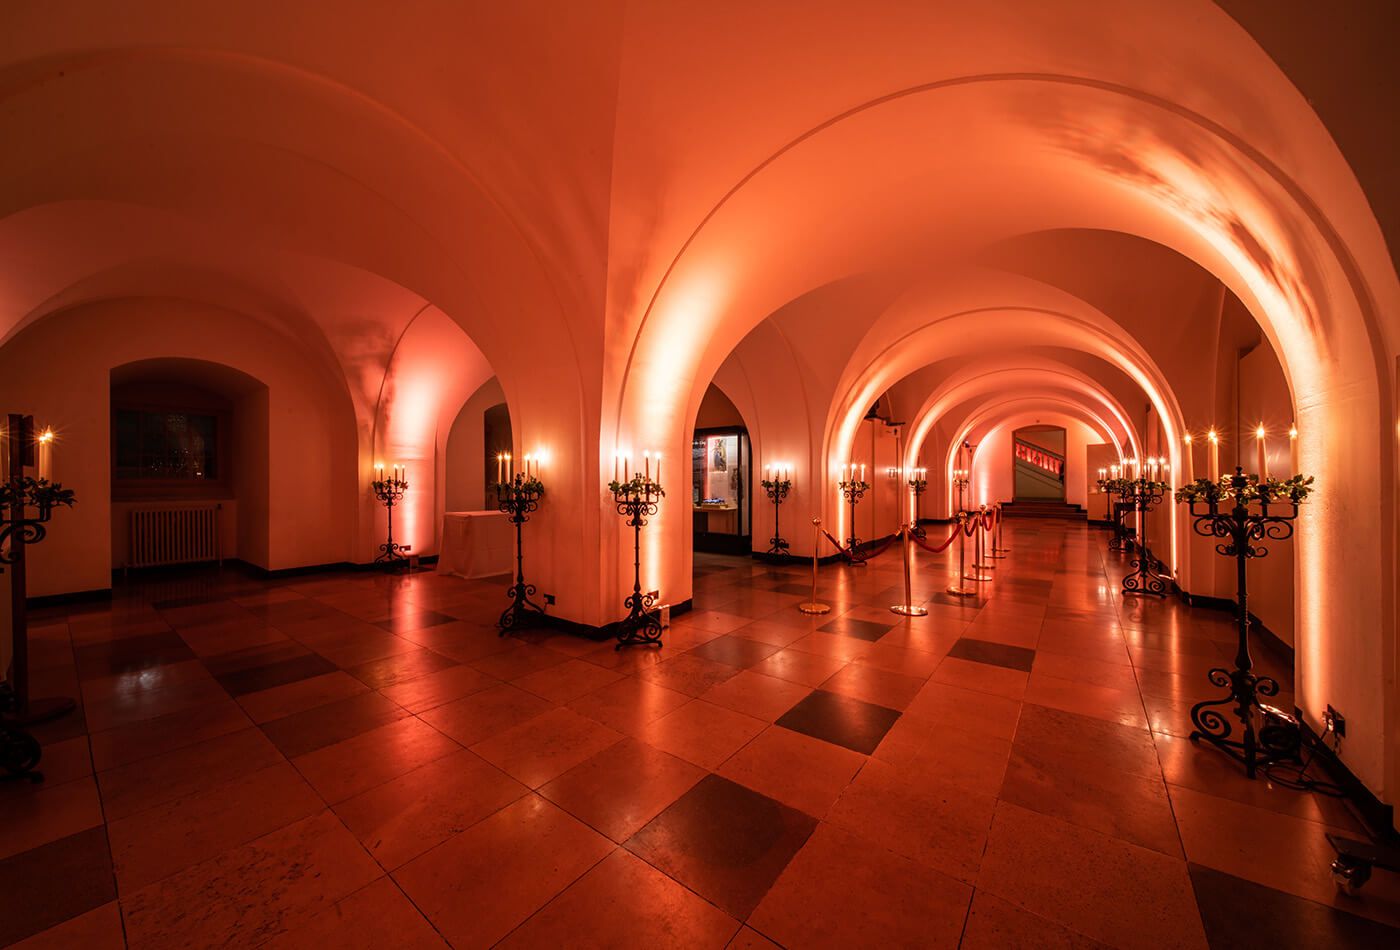 Underground event, arched ceilings and lit entirely with candle stands